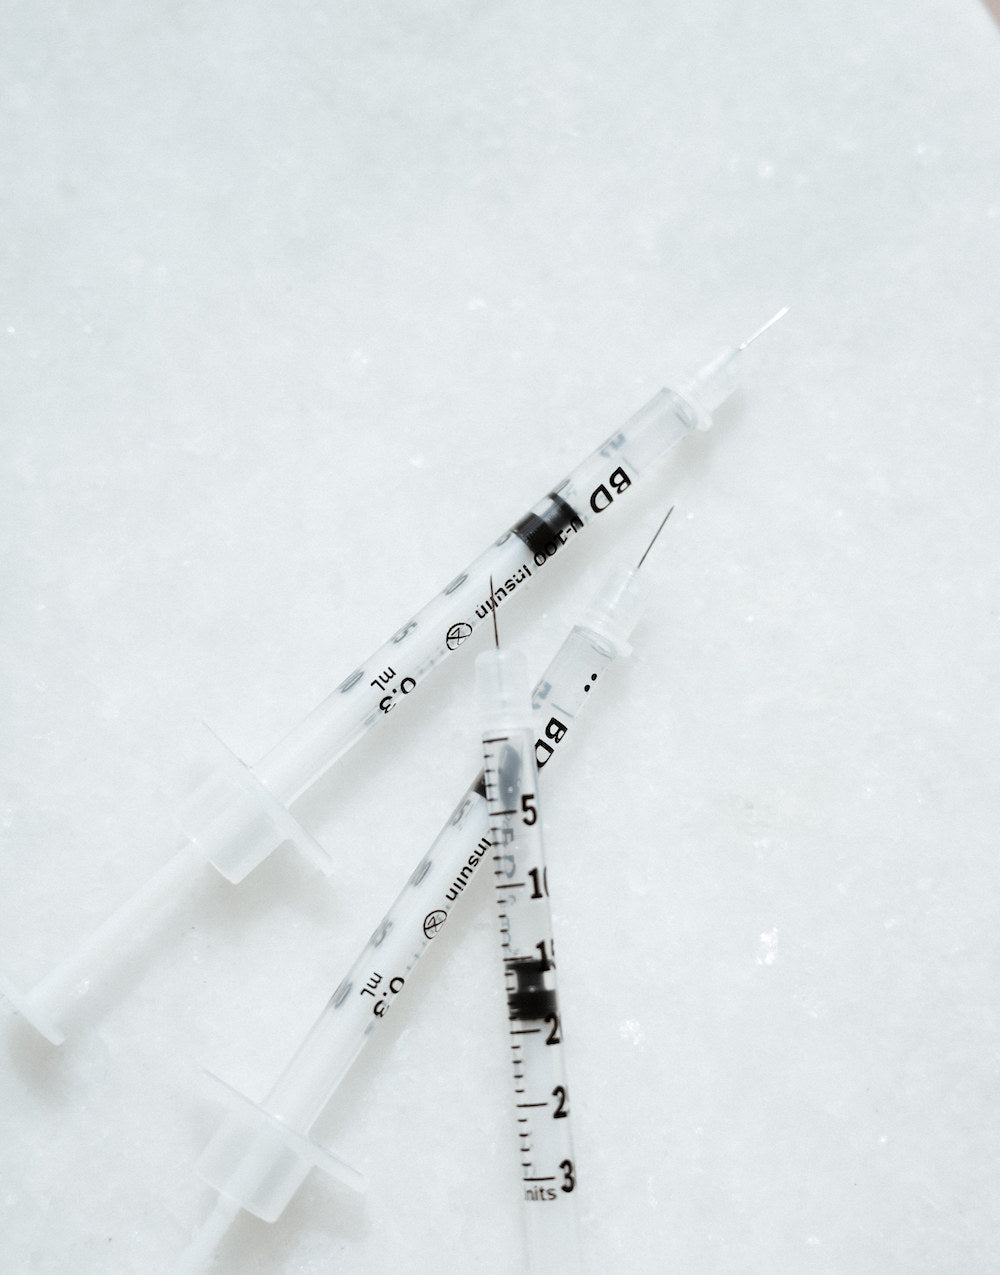 Dysport vs. Botox: What’s the Big Difference?